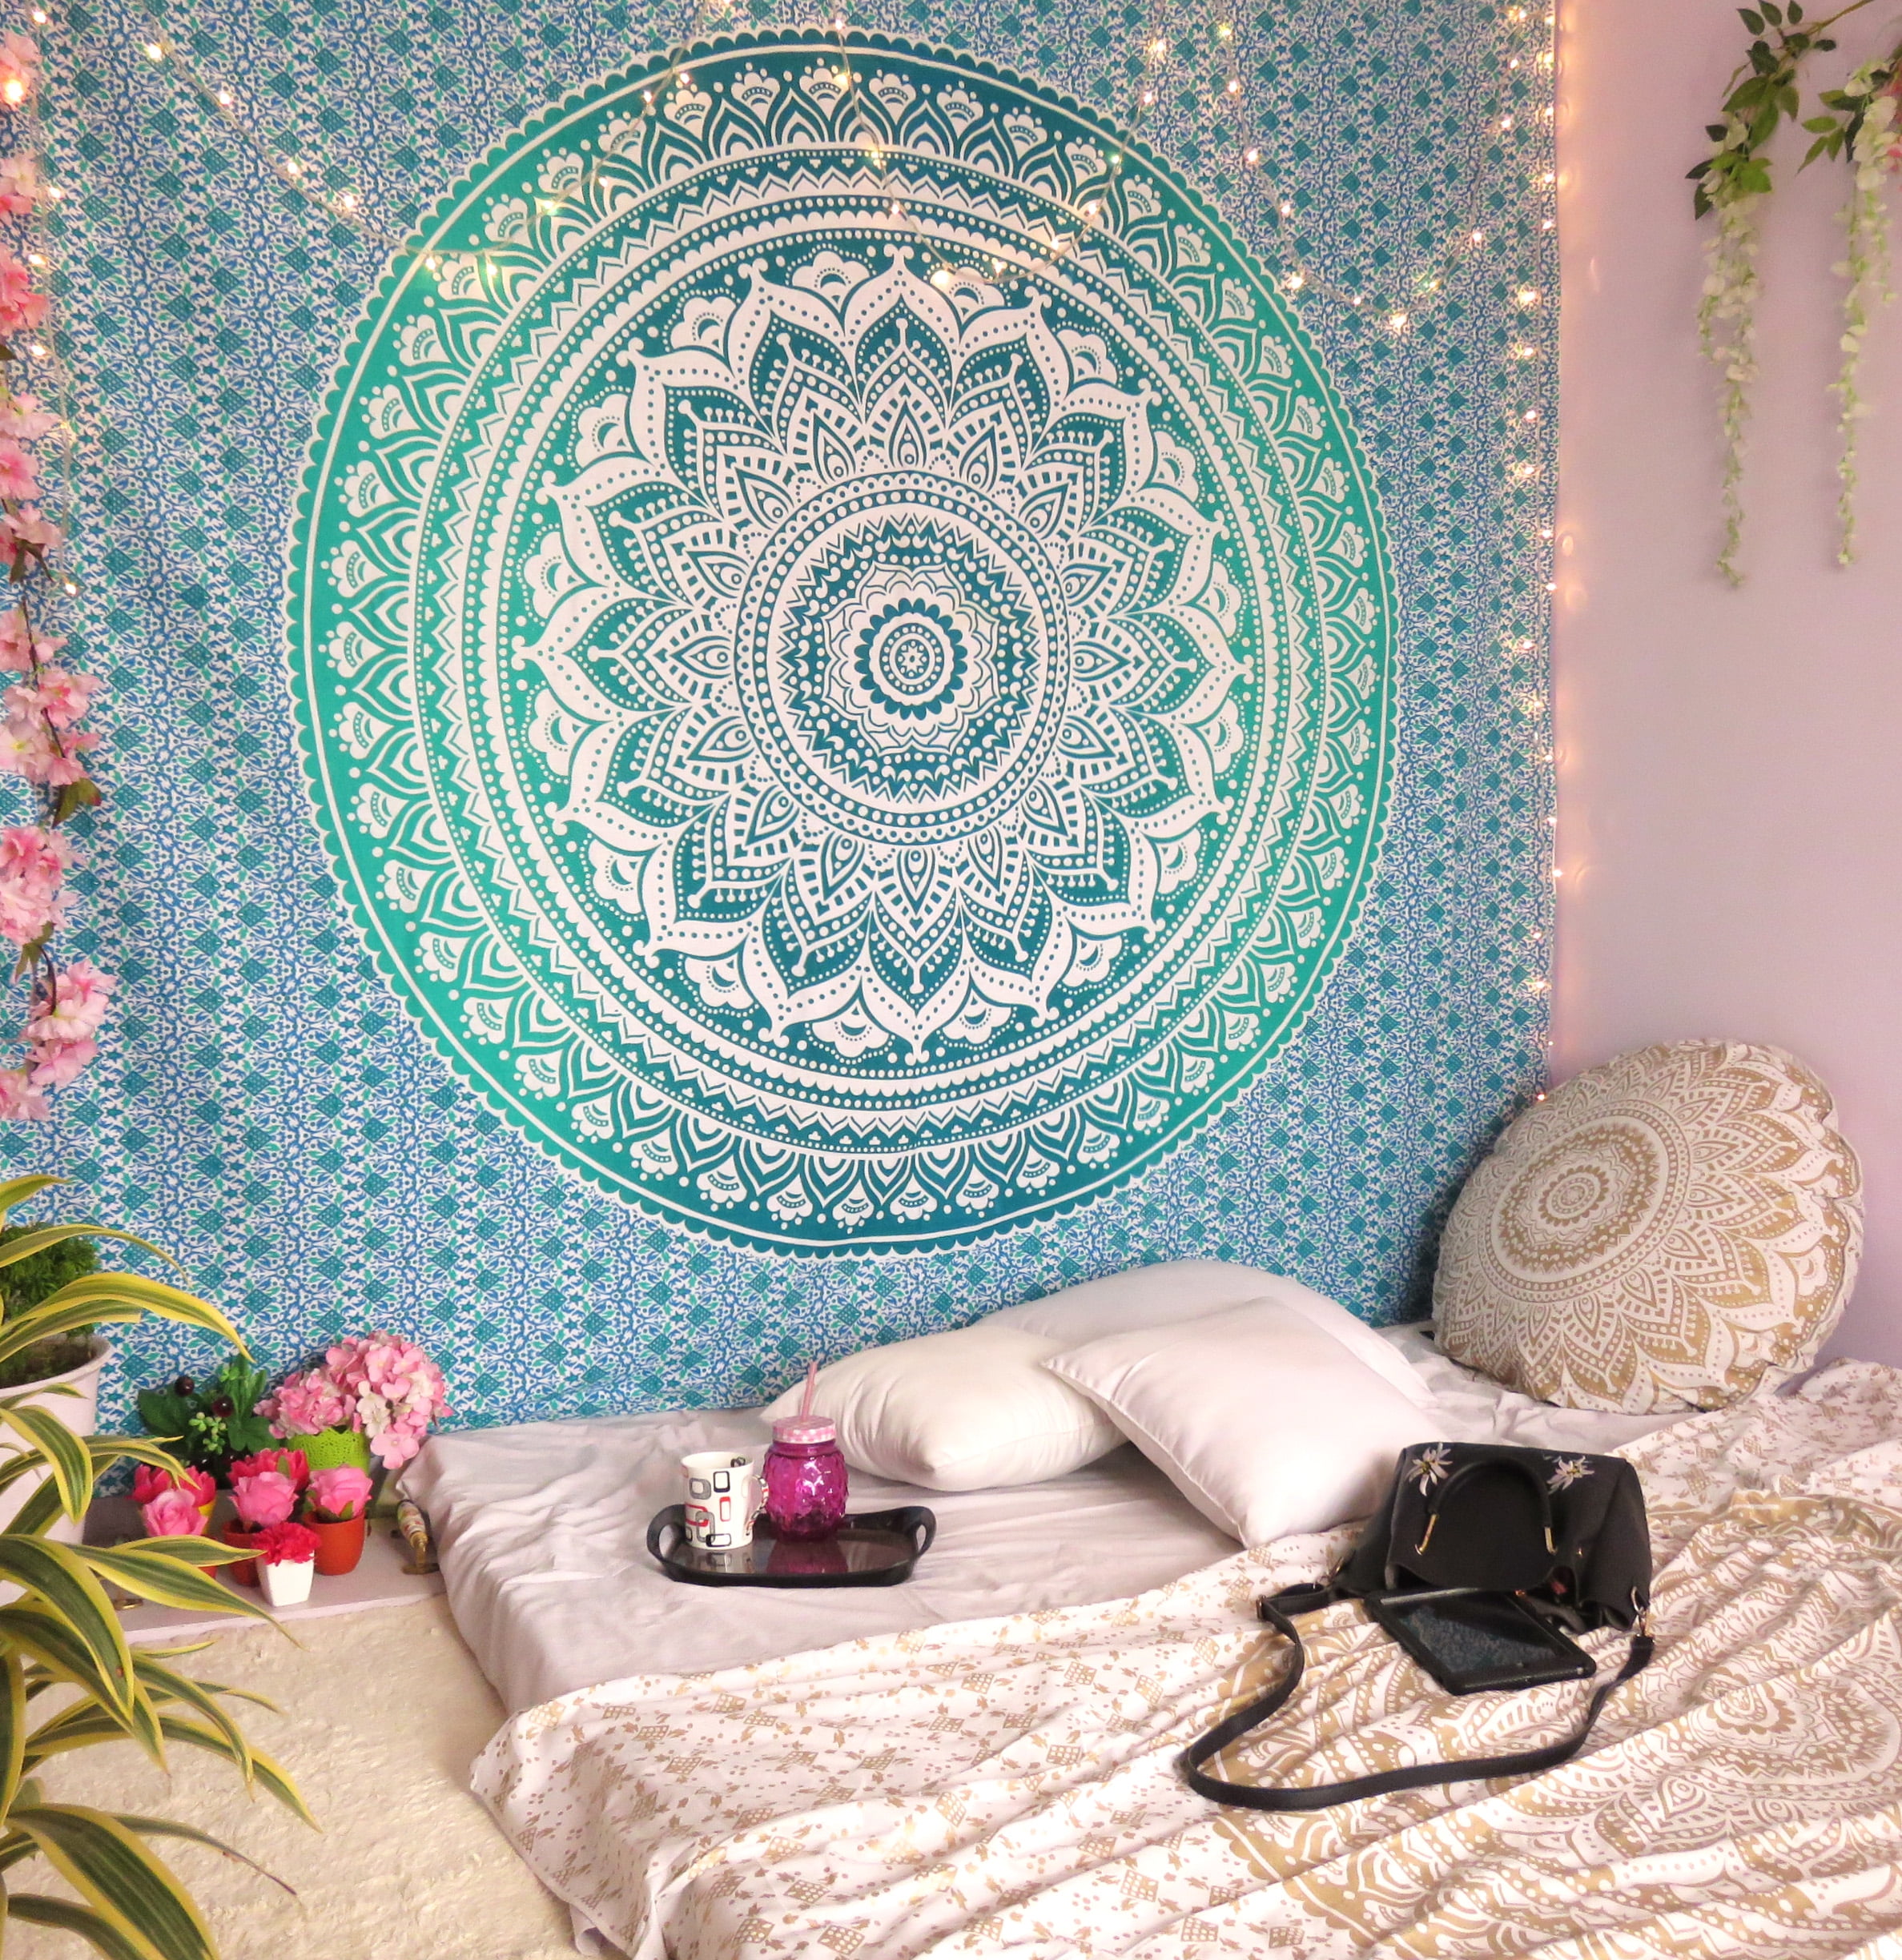 Wall Mandala Tapestry Indian Hanging Hippie Decor Ombre Bohemian Bedspread Decor 